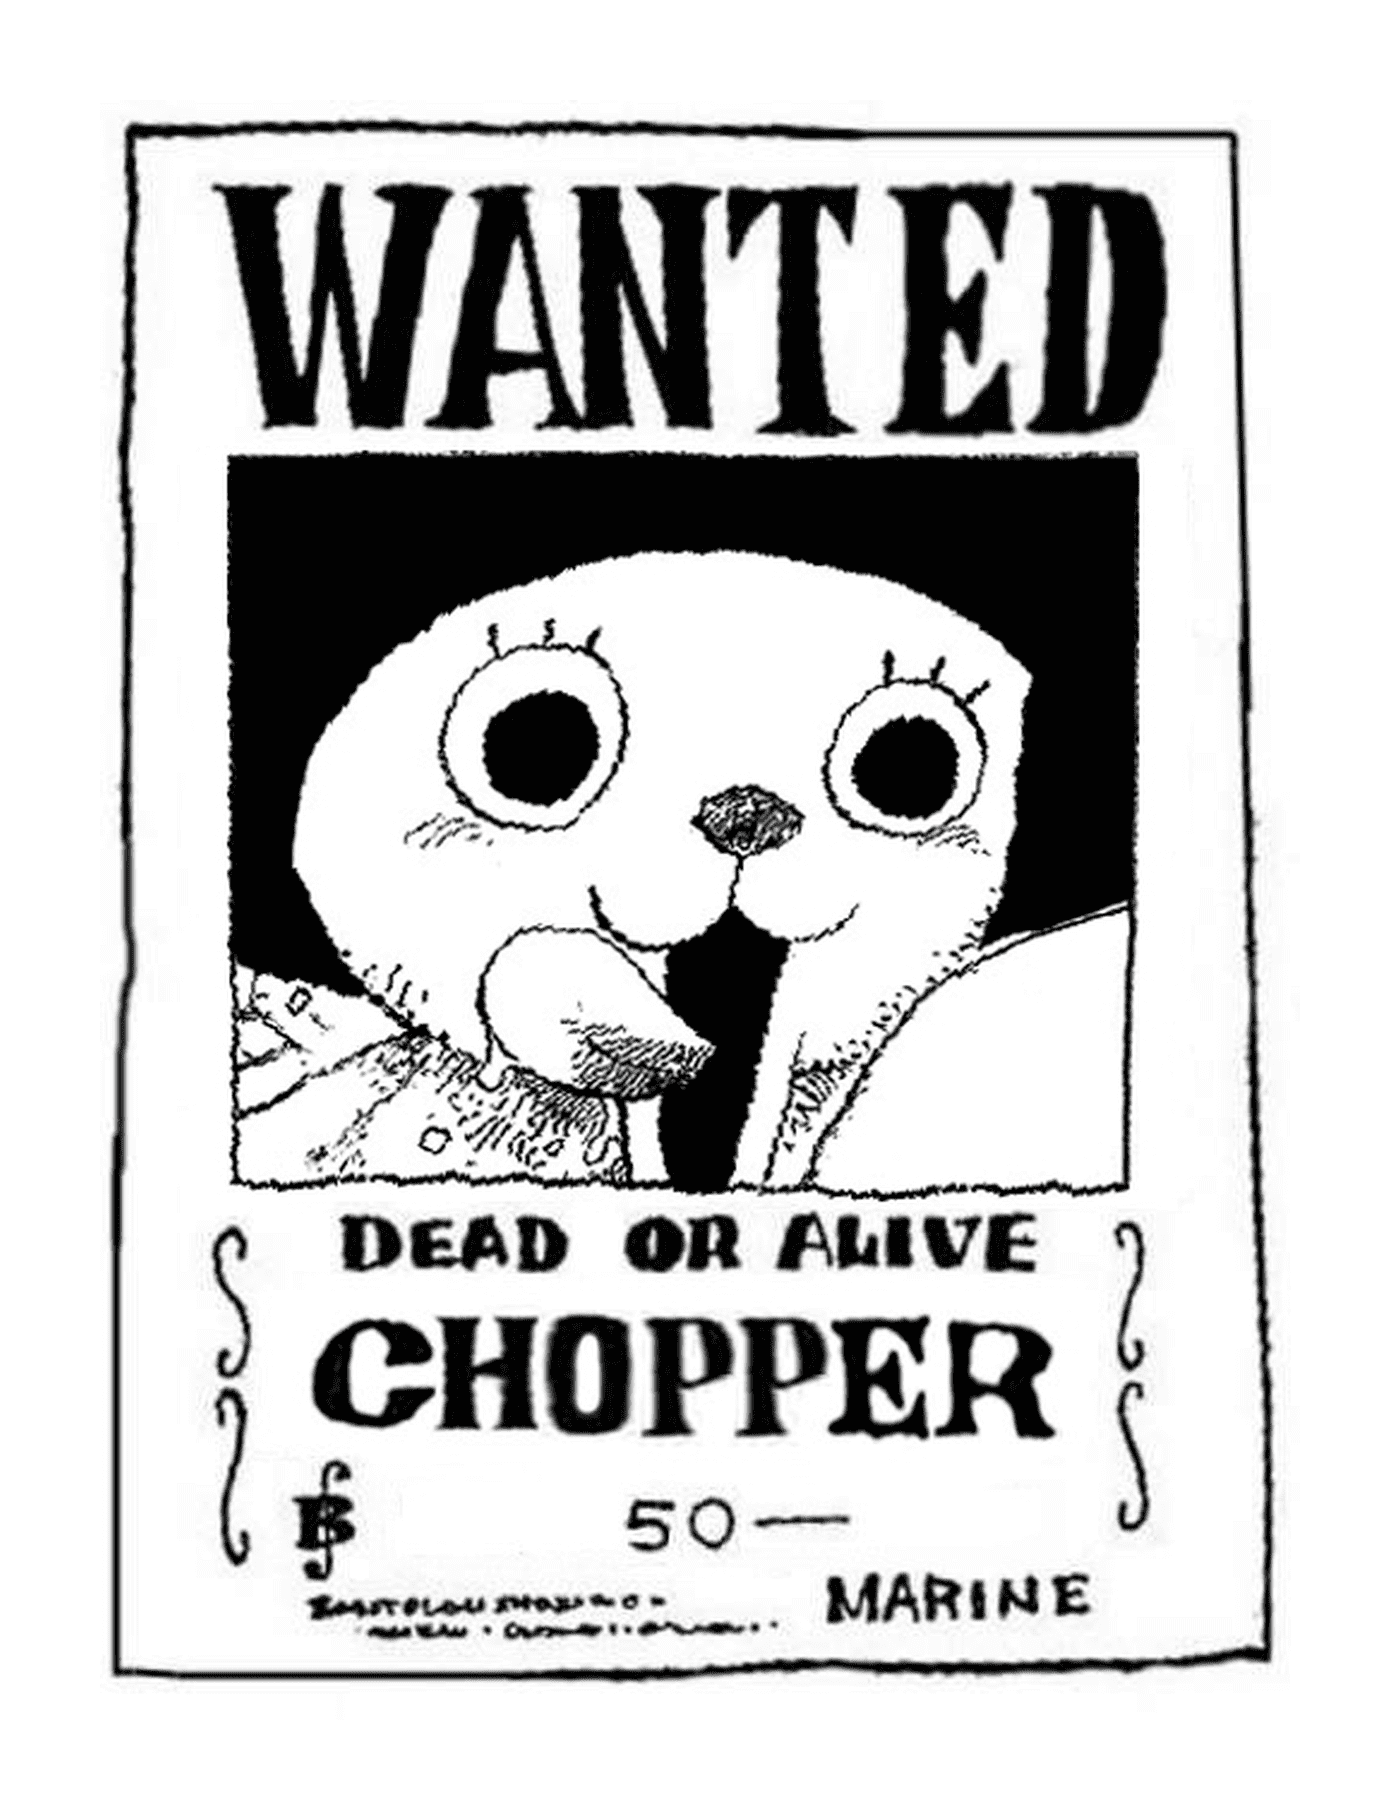  Wanted Chopper, dead or alive 